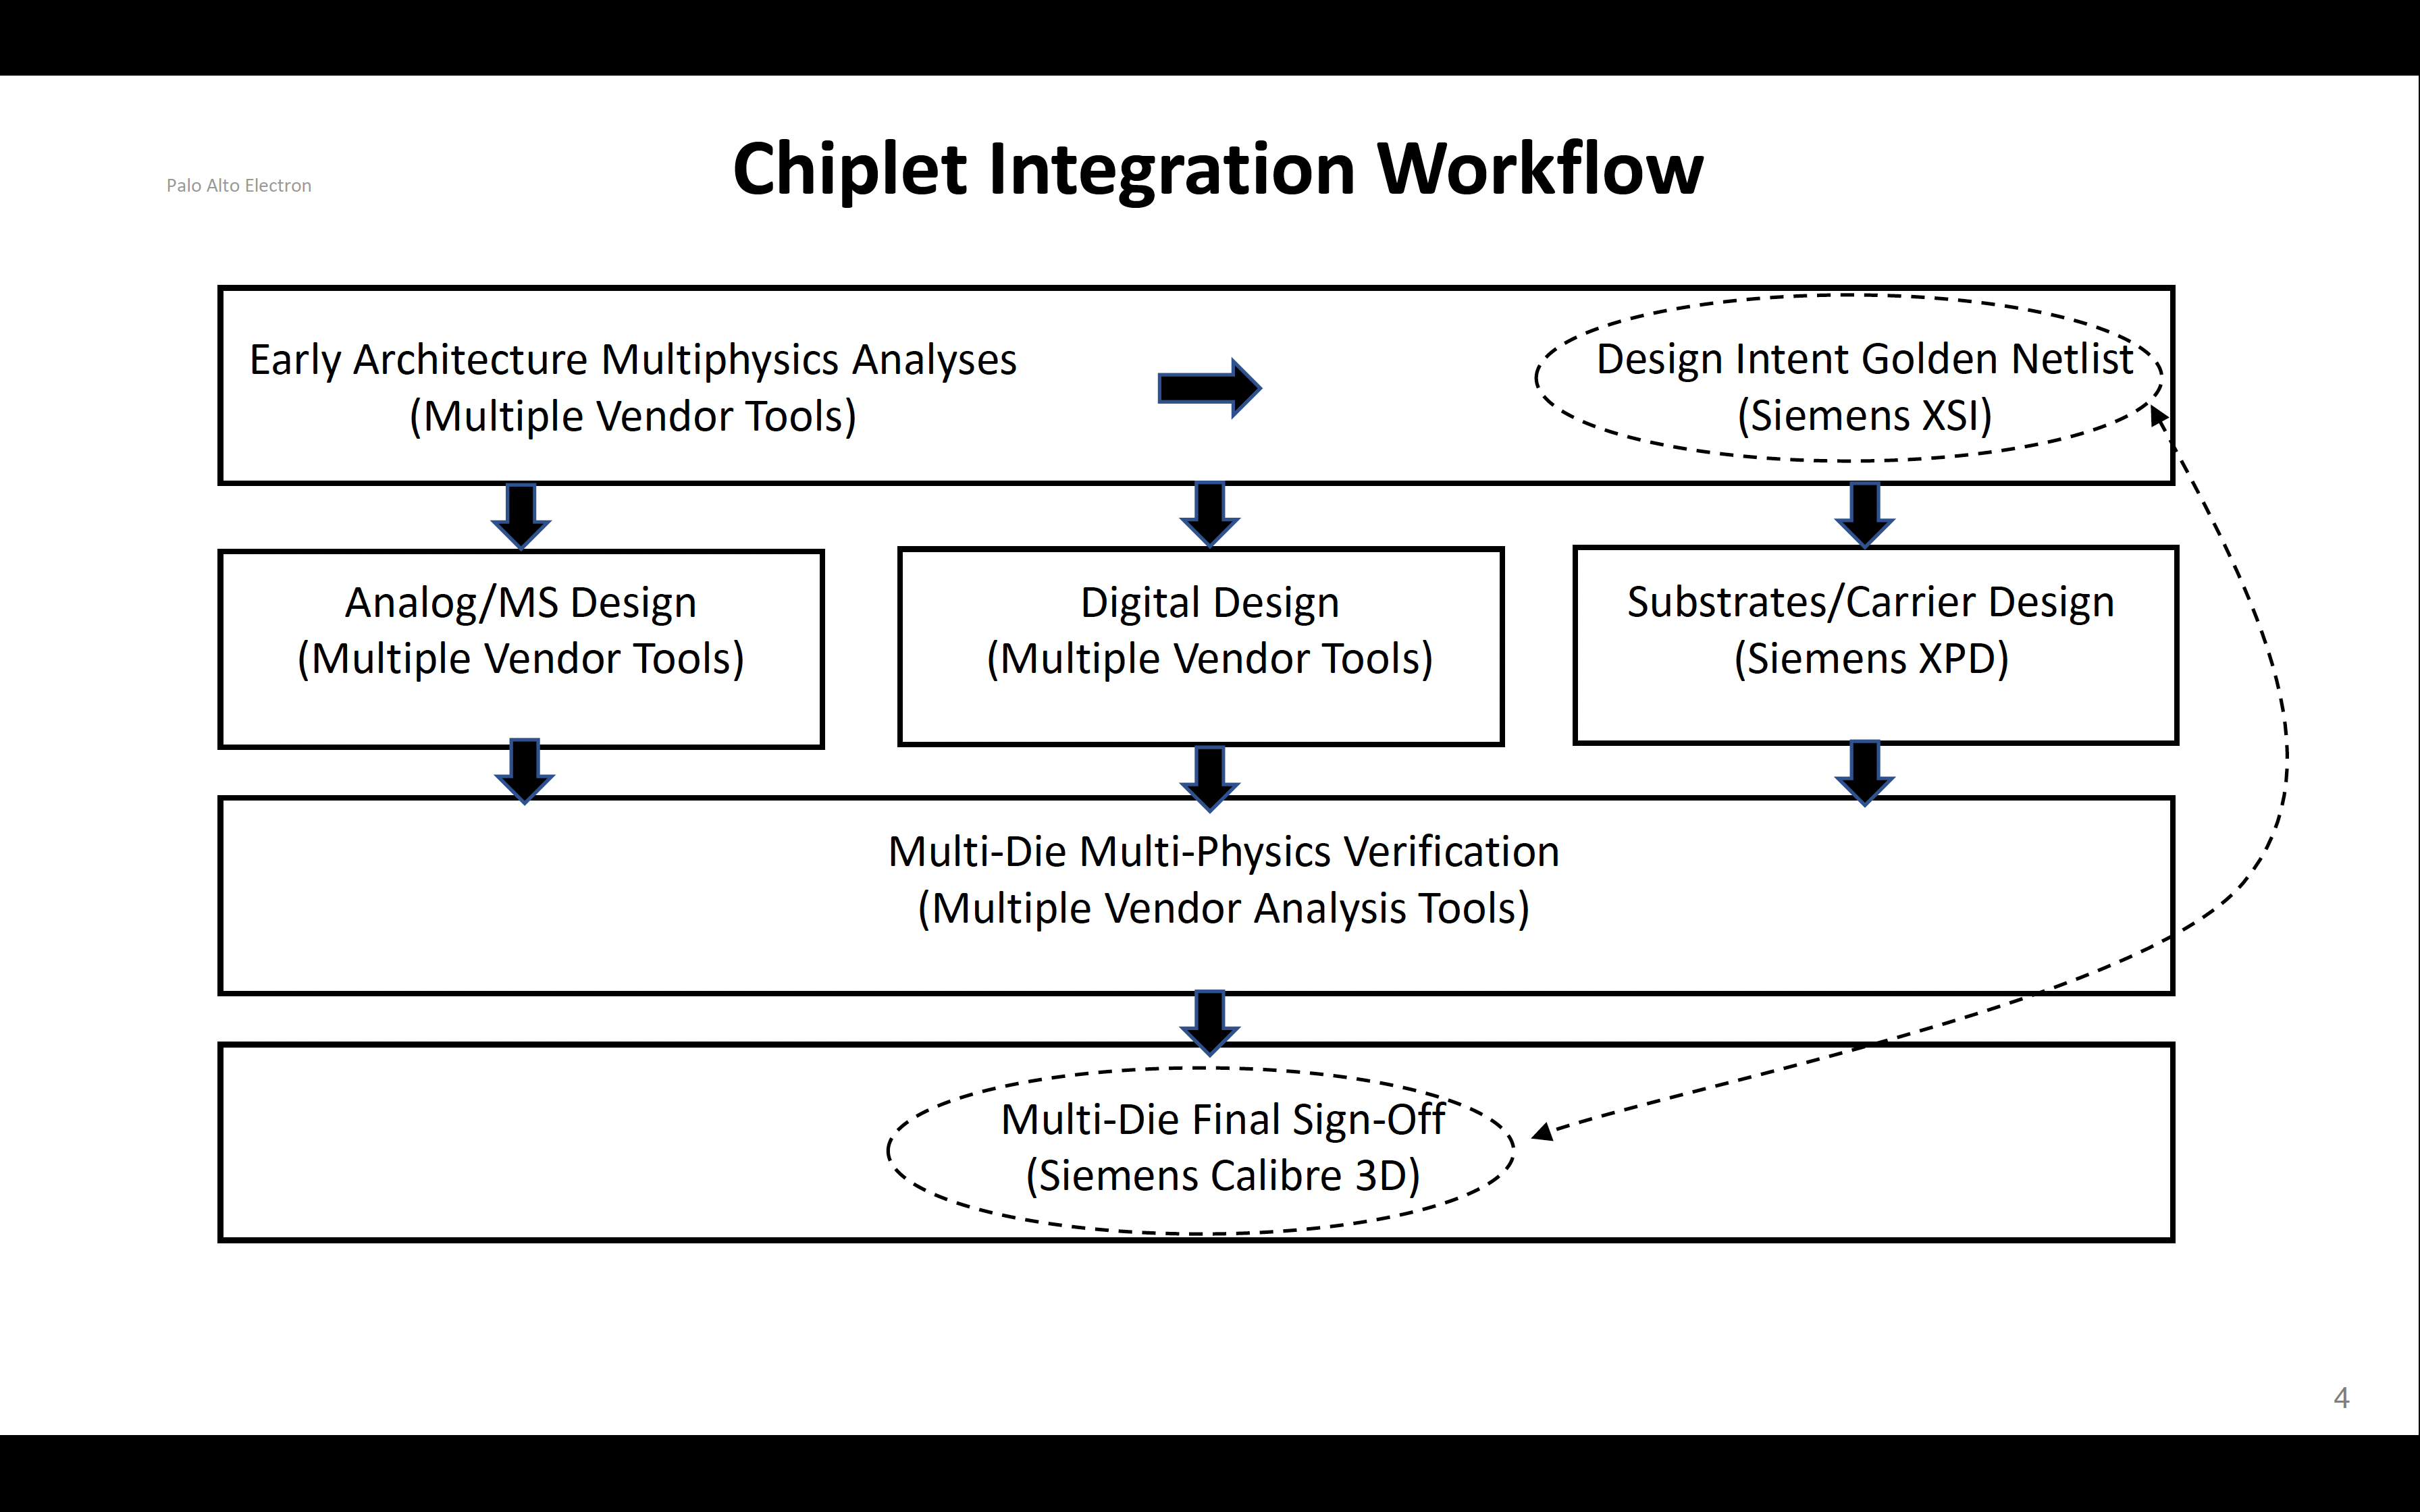 Chiplet Modeling and Workflow Standardization Through CDX - Semiwiki